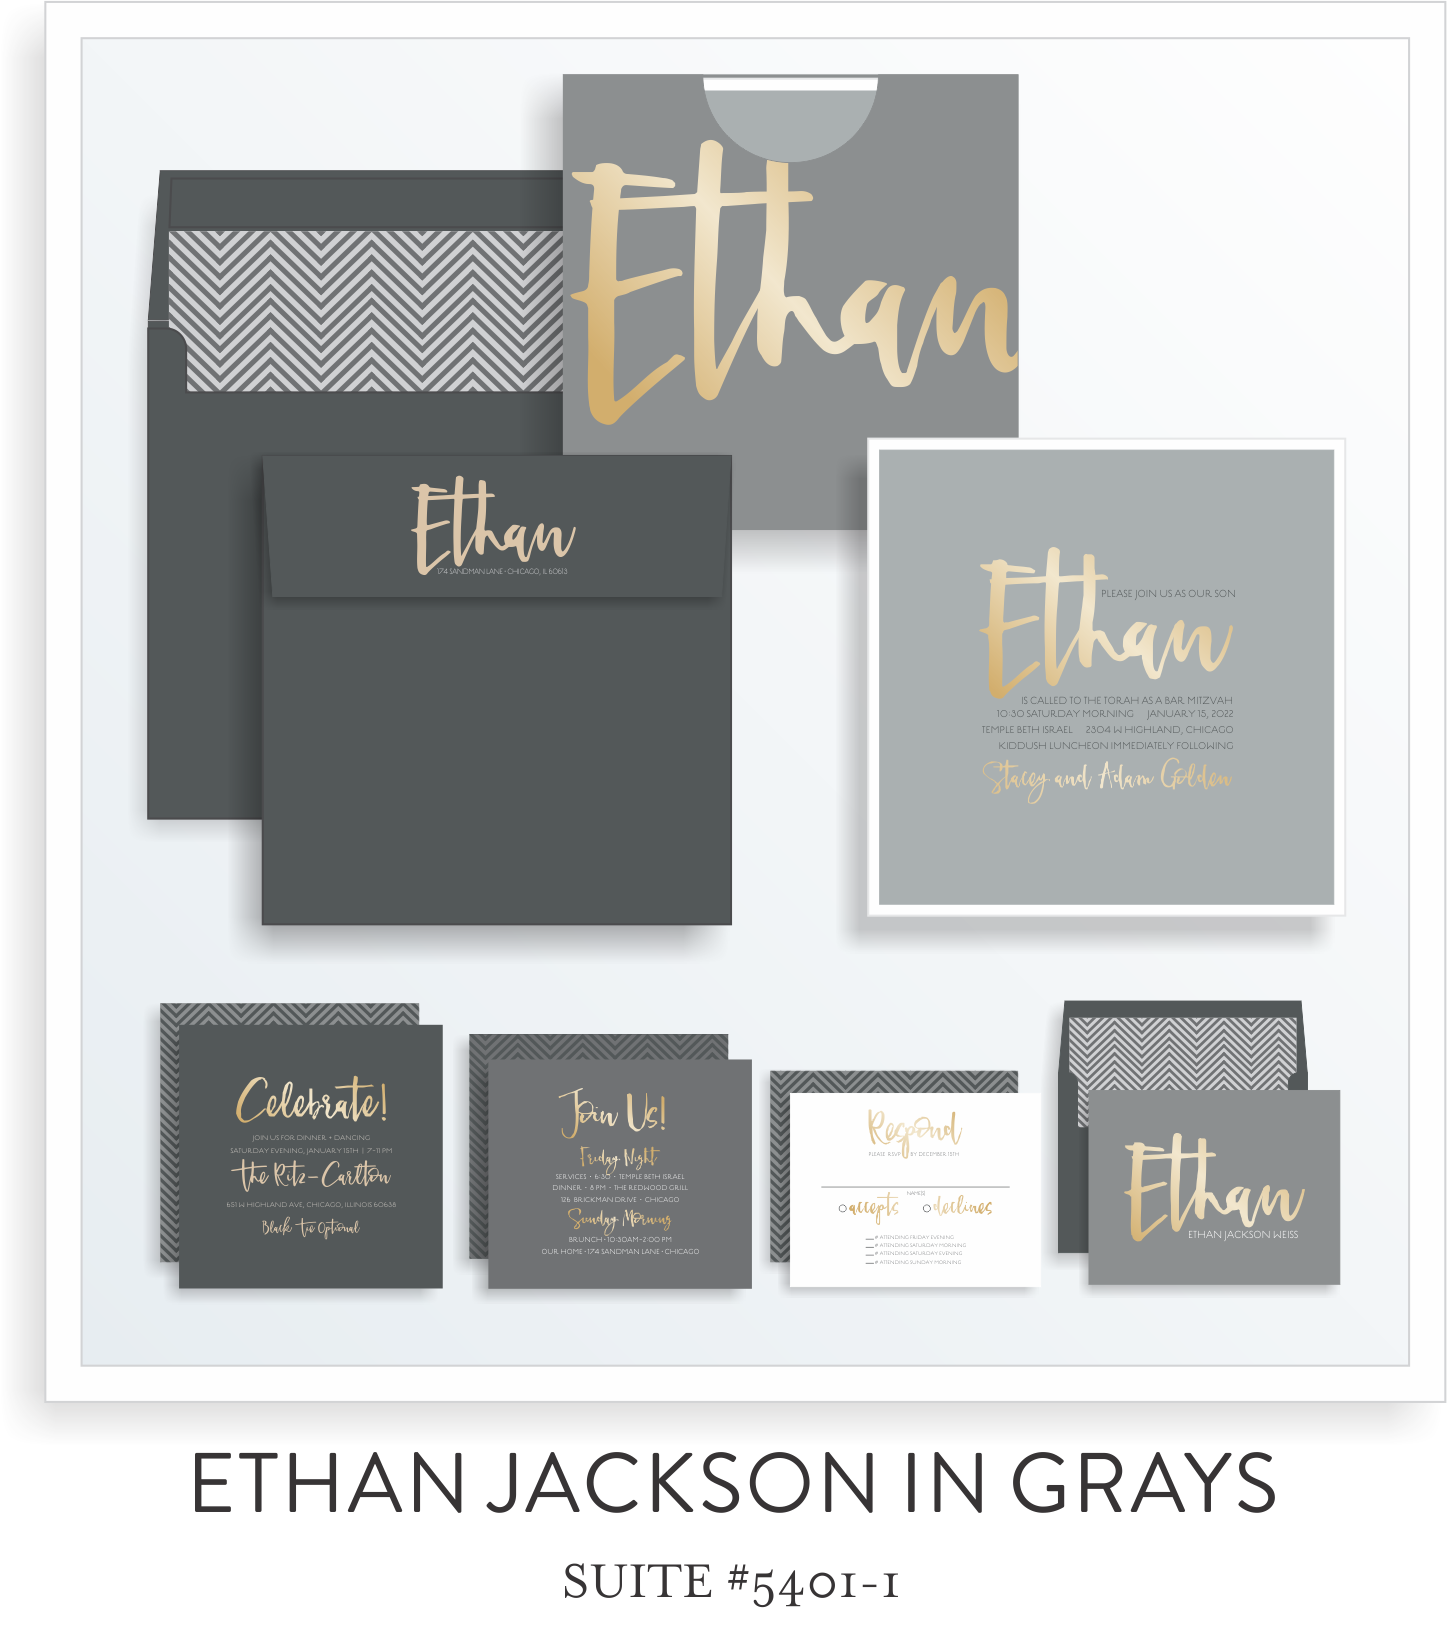 5401-1 ETHAN JACKSON IN GRAYS SUITE THUMB.png